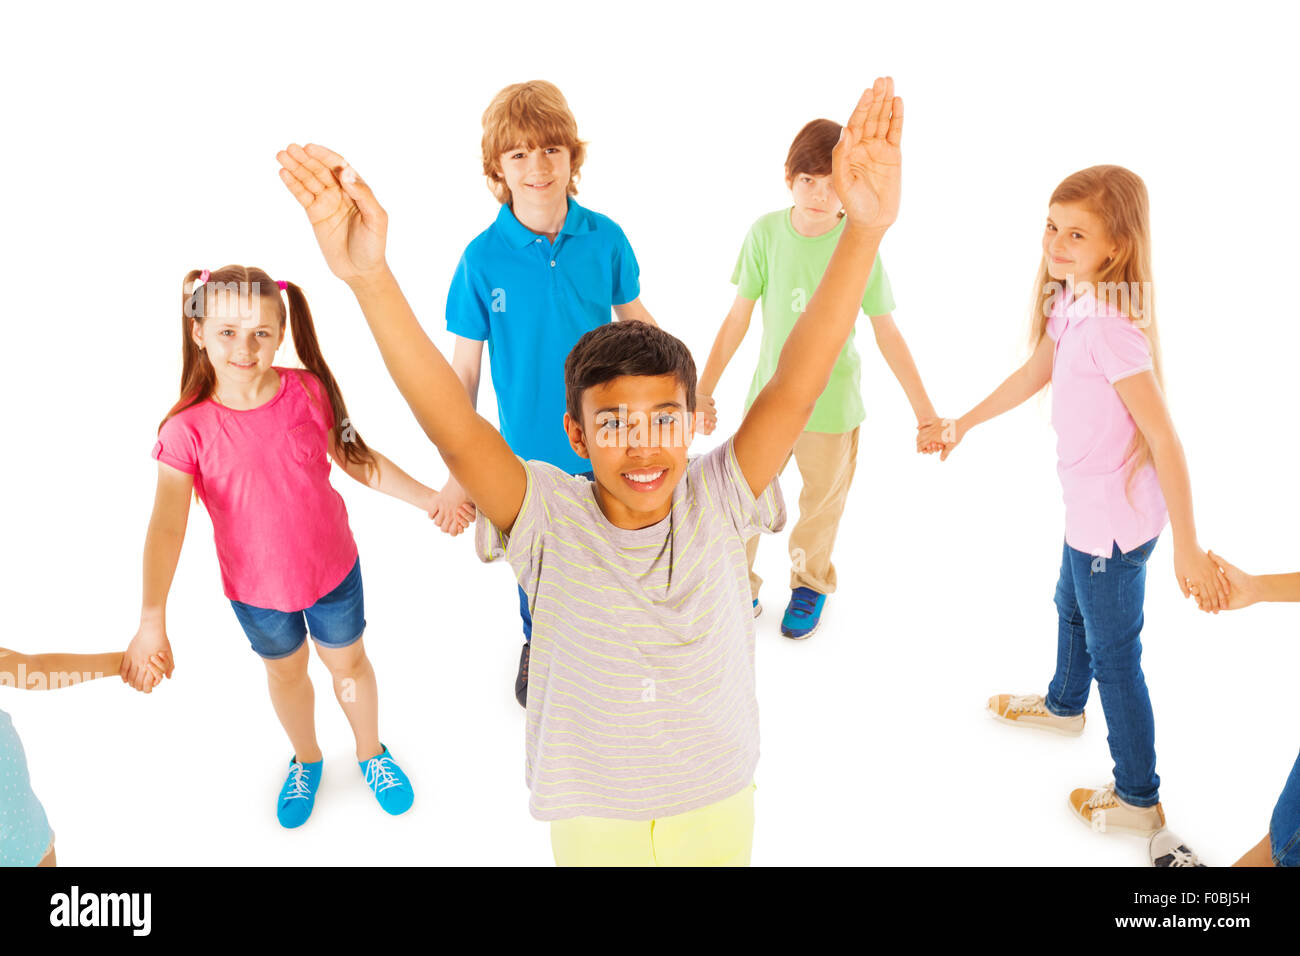 Boy with lifted hands stand in circle of friends Stock Photo